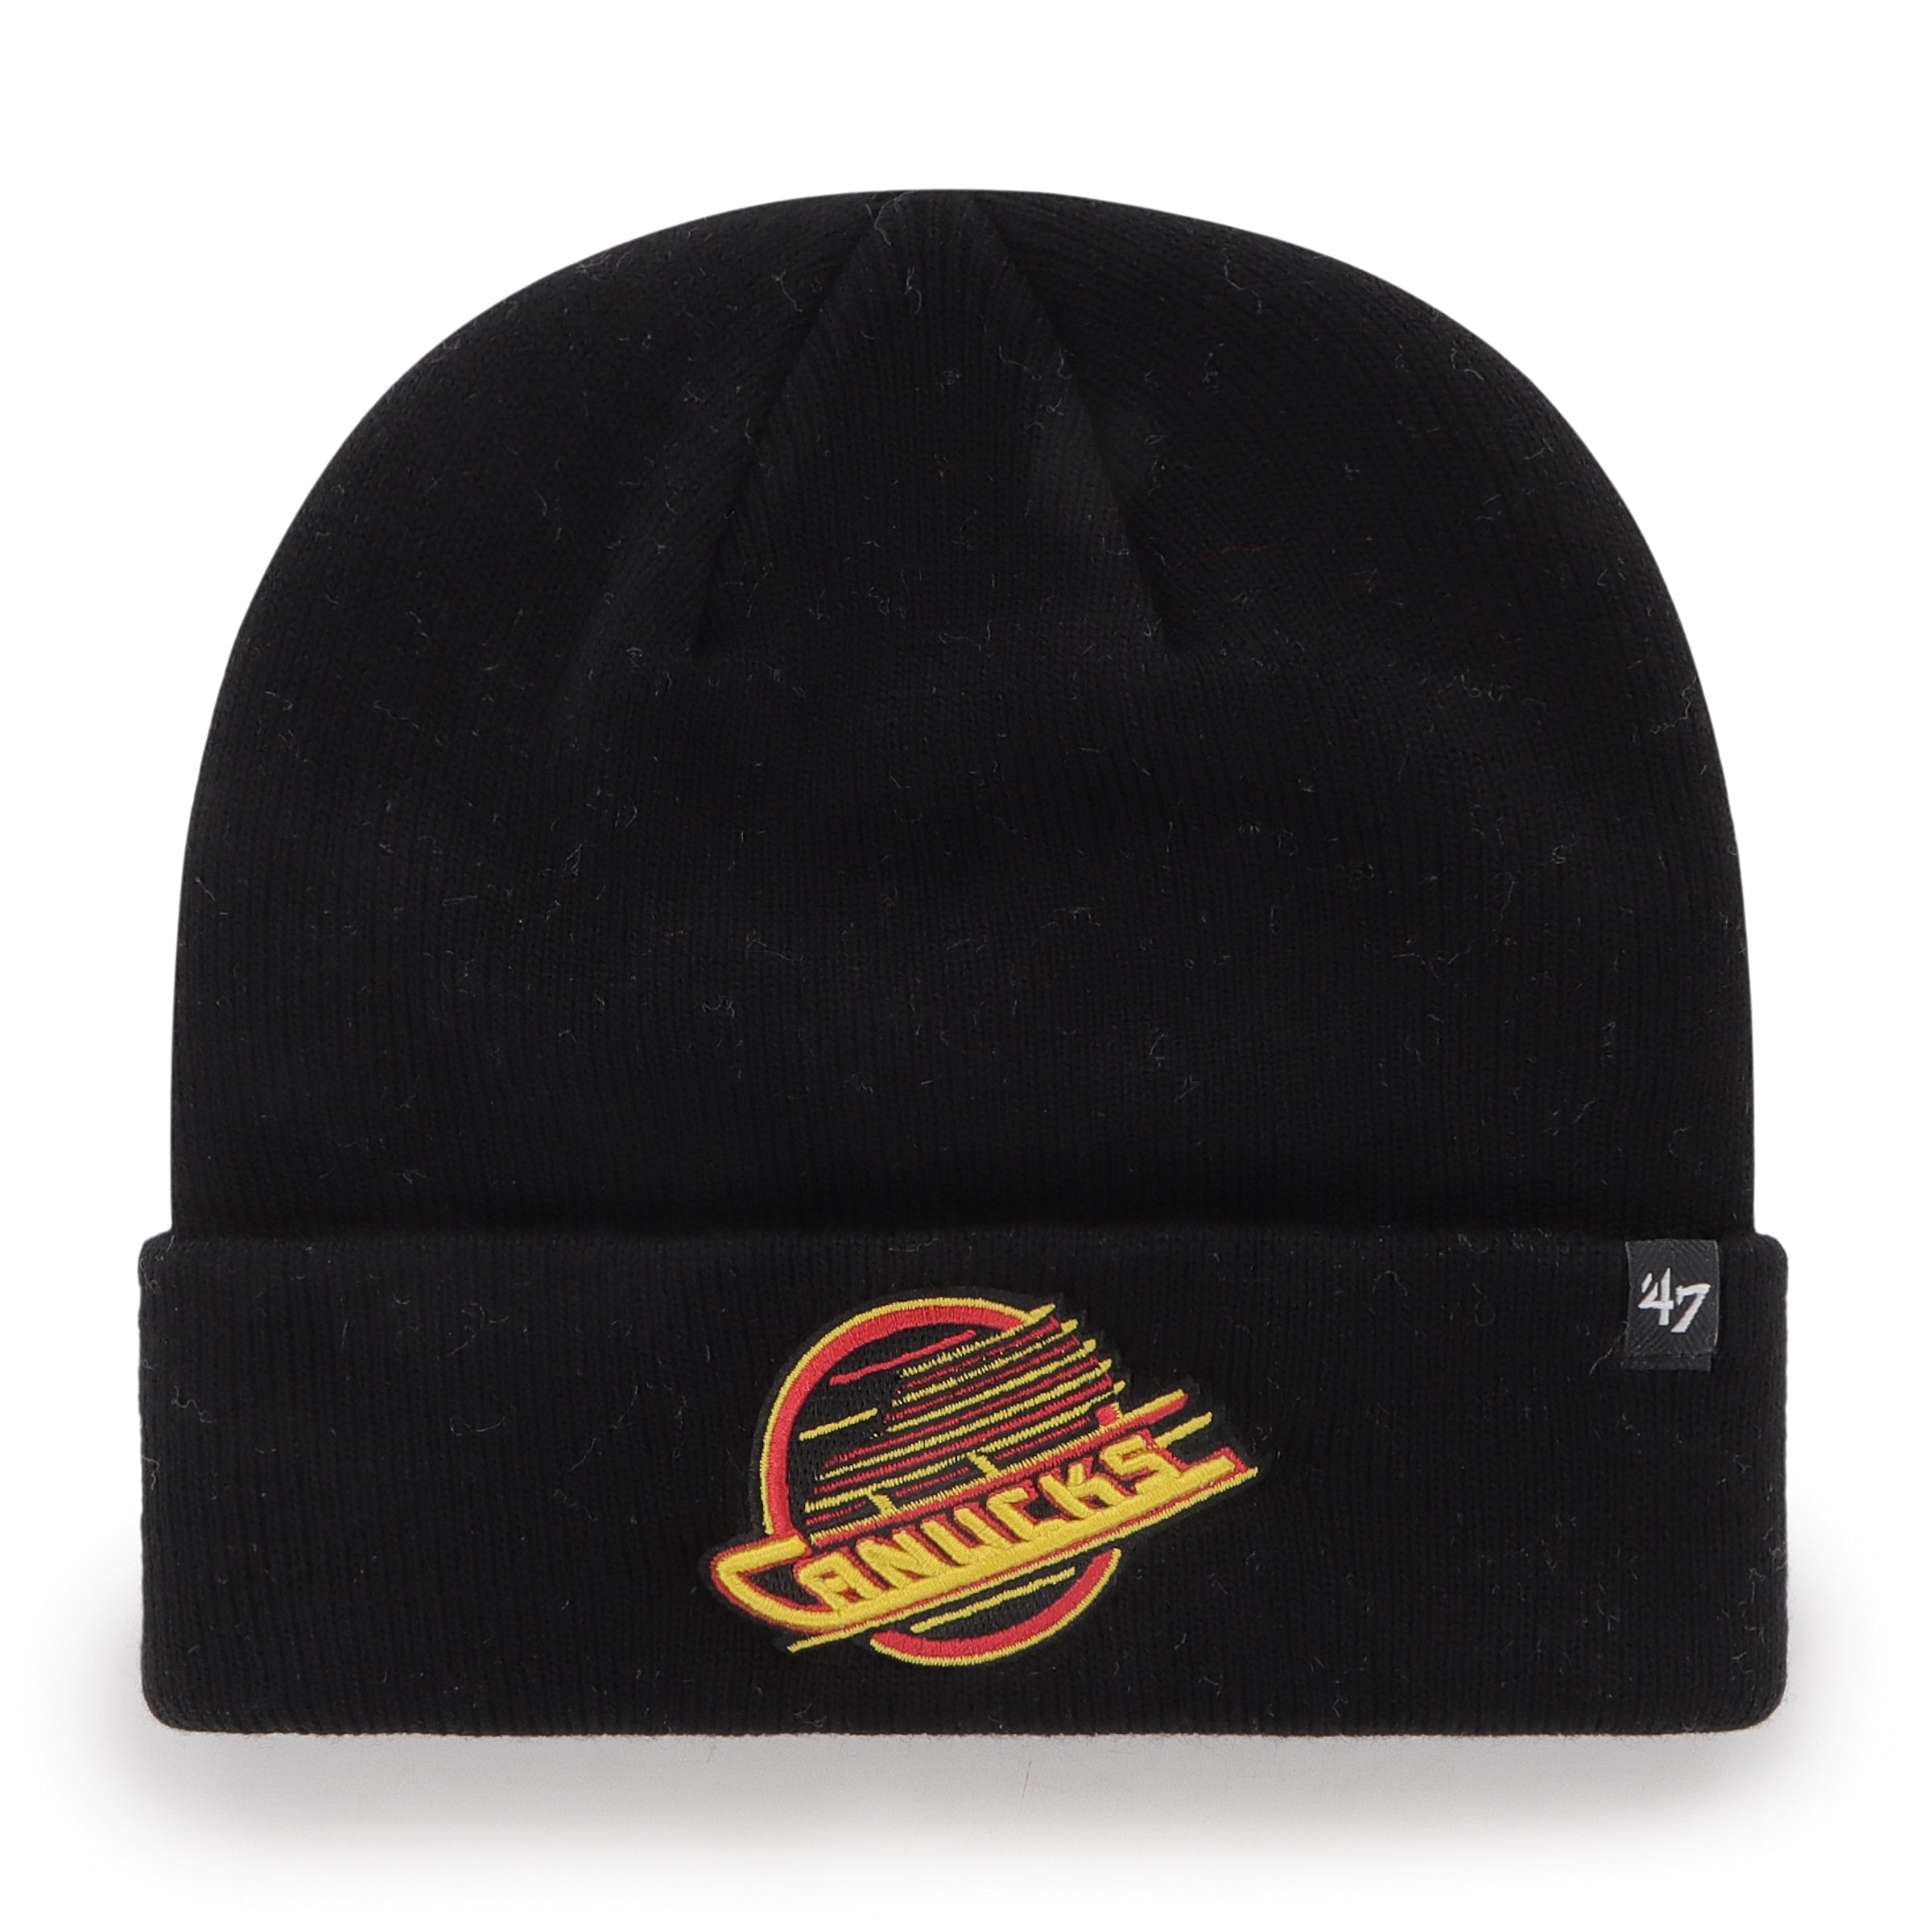 Vancouver Canucks Nhl Raised Cuff Knit Hat